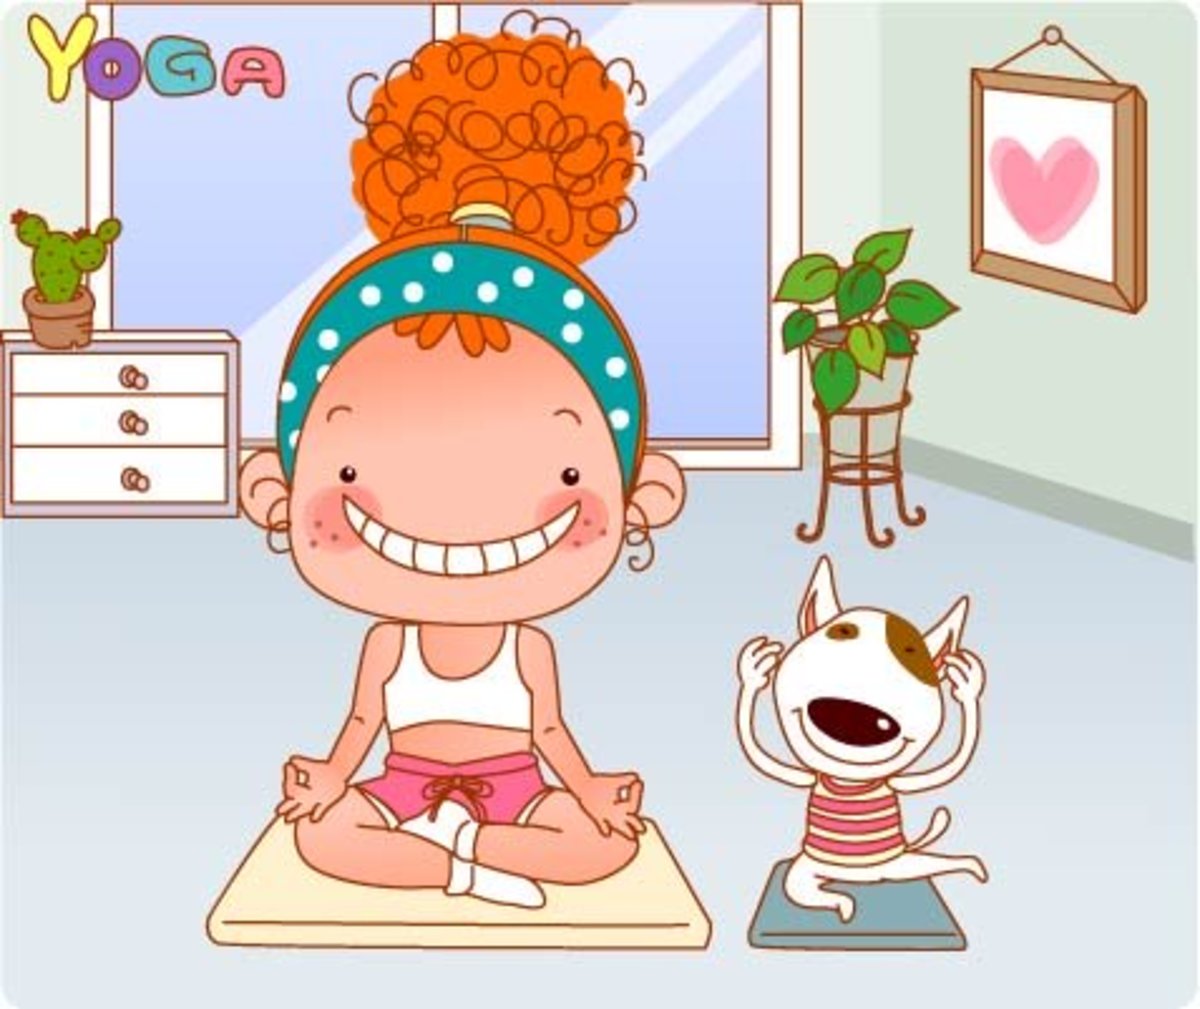 Yoga provides an opportunity for kids to practice being courageous and strong.